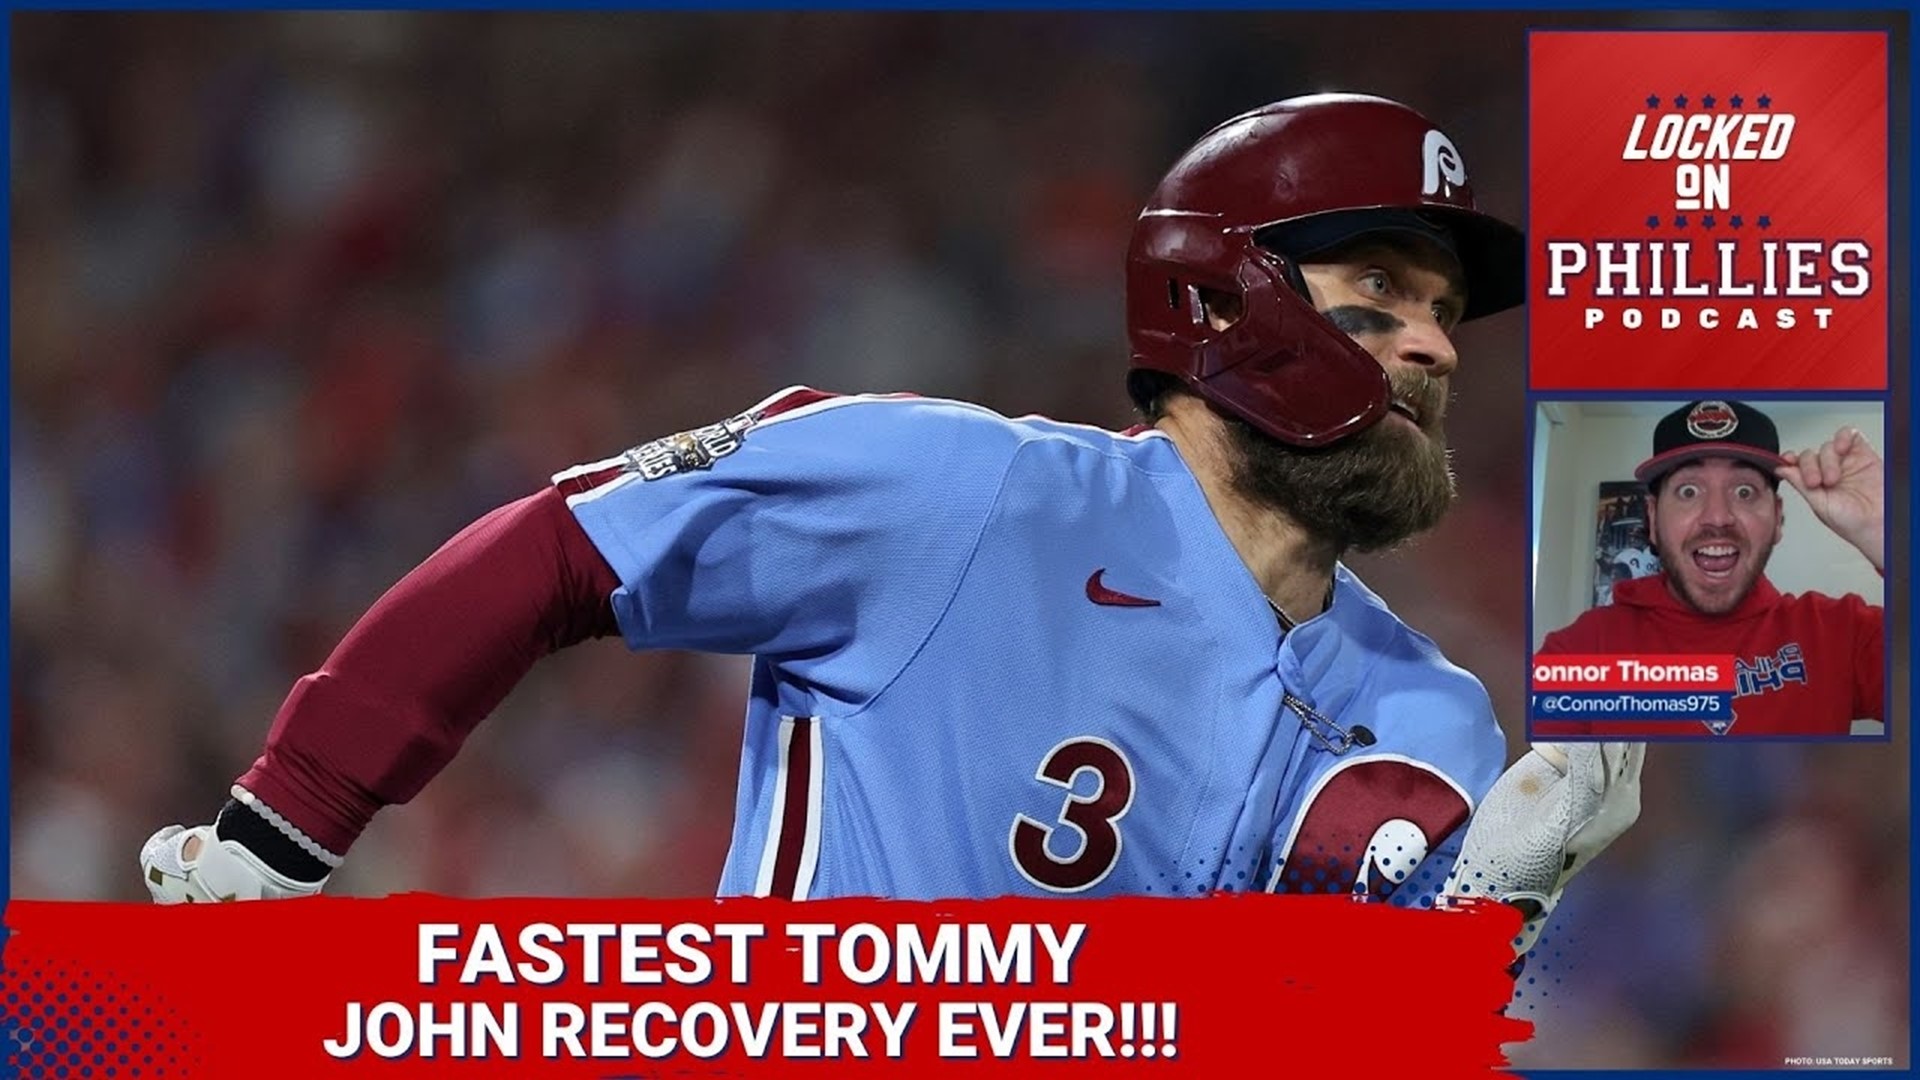 In today's episode, Connor reacts to the incredible news that Bryce Harper has been cleared to return to the Philadelphia Phillies' lineup.